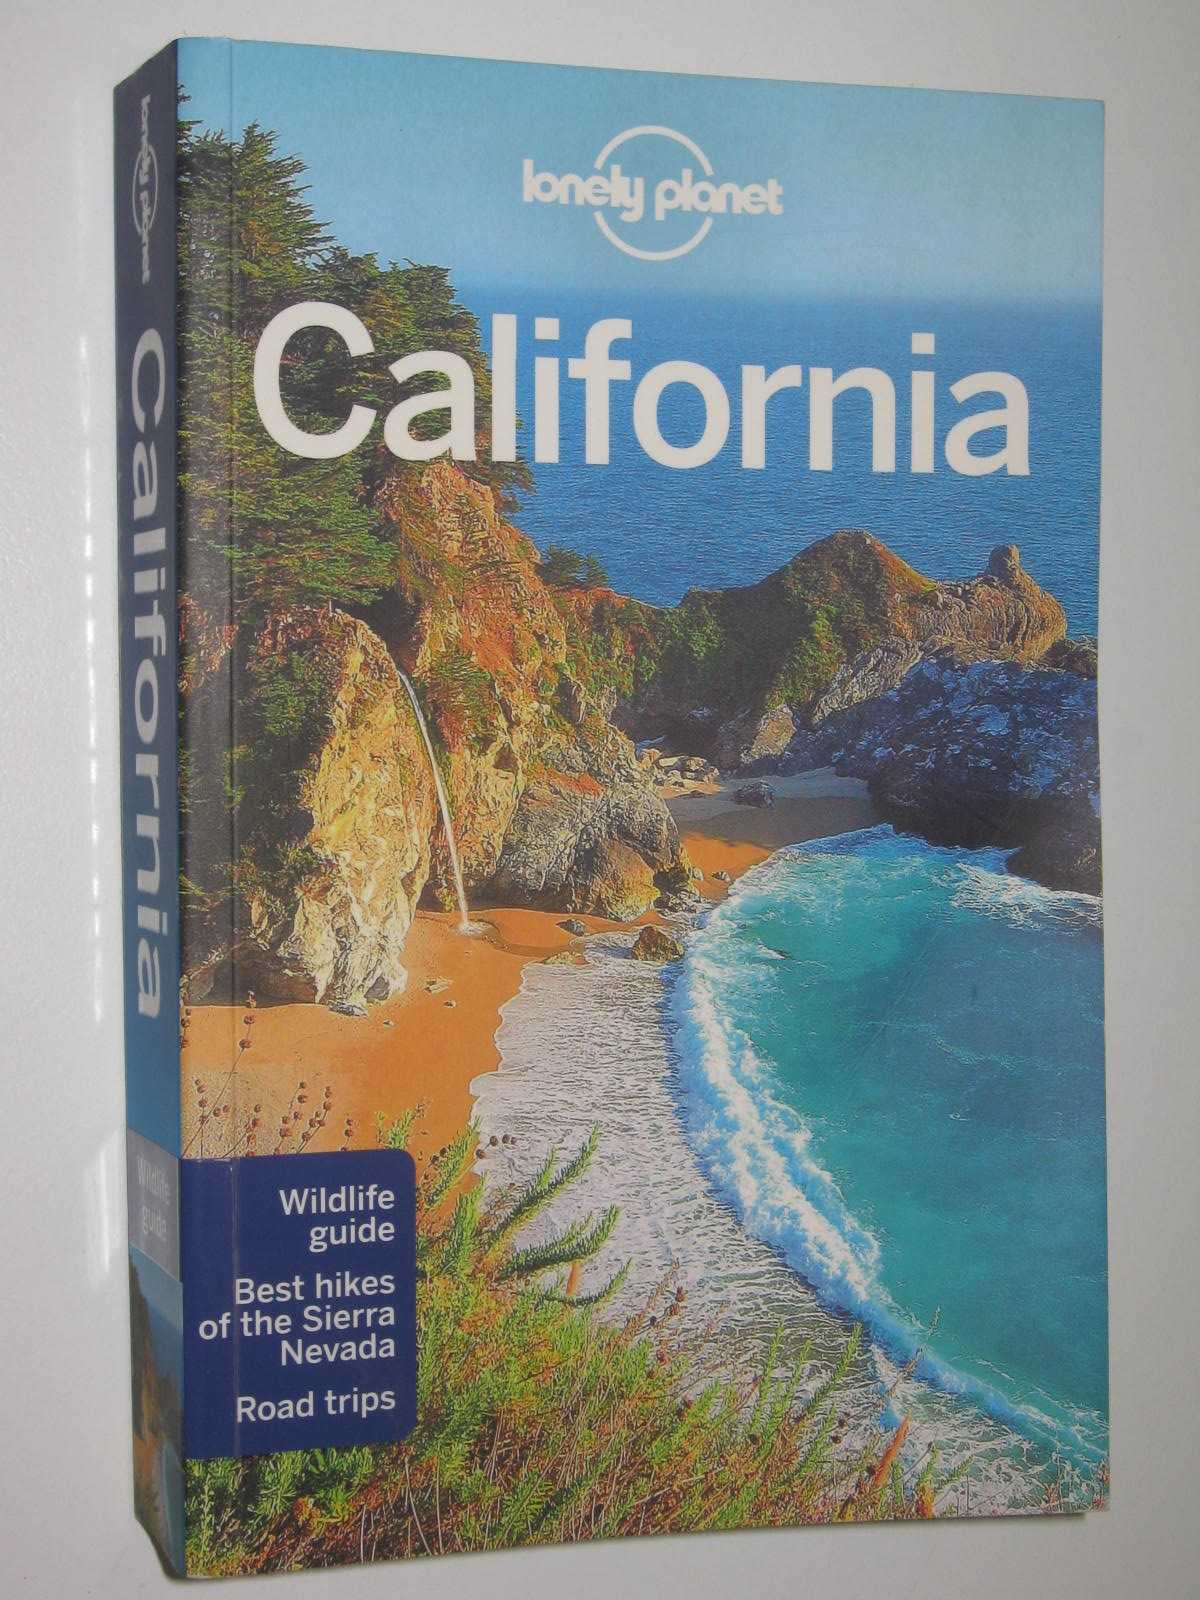 Cali travel - Lonely Planet